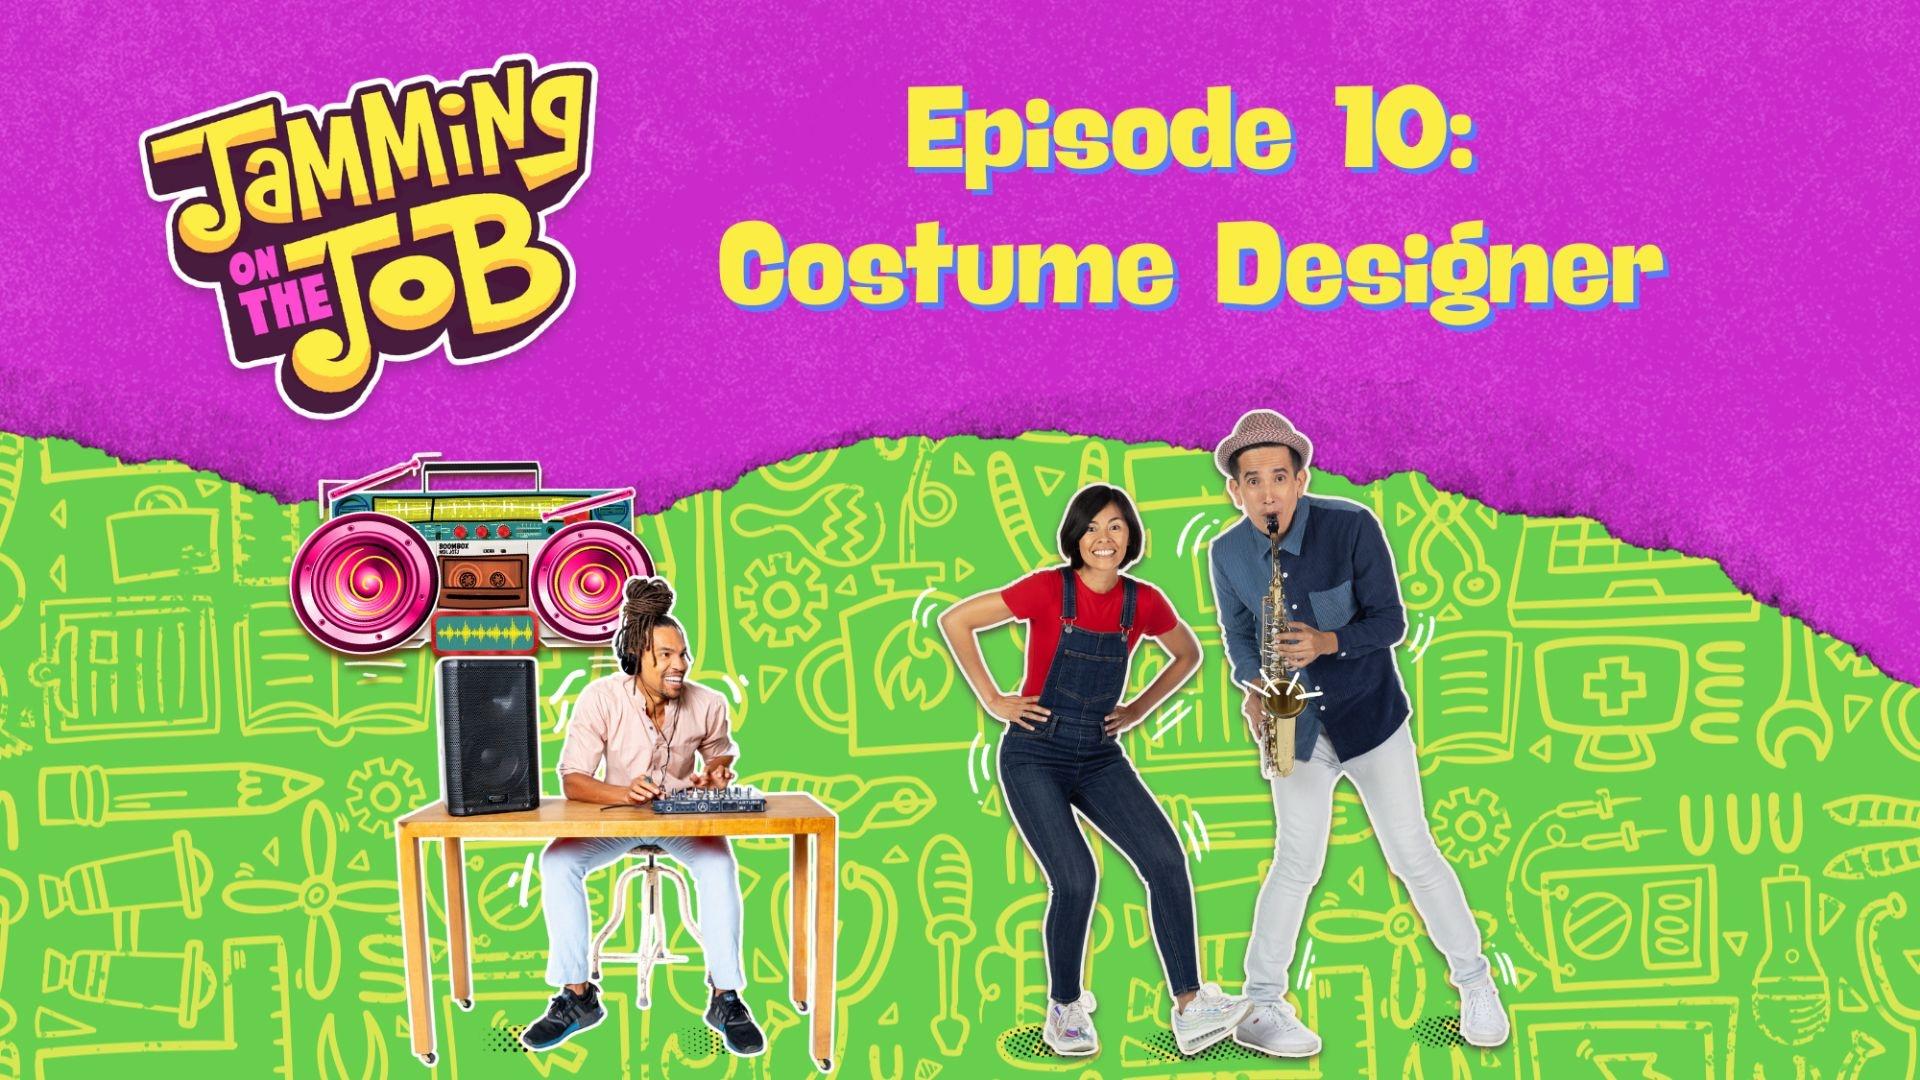 Christina and Andrés with Boombox (Pierce Freelon) with, "Episode 10: Costume Designer" 